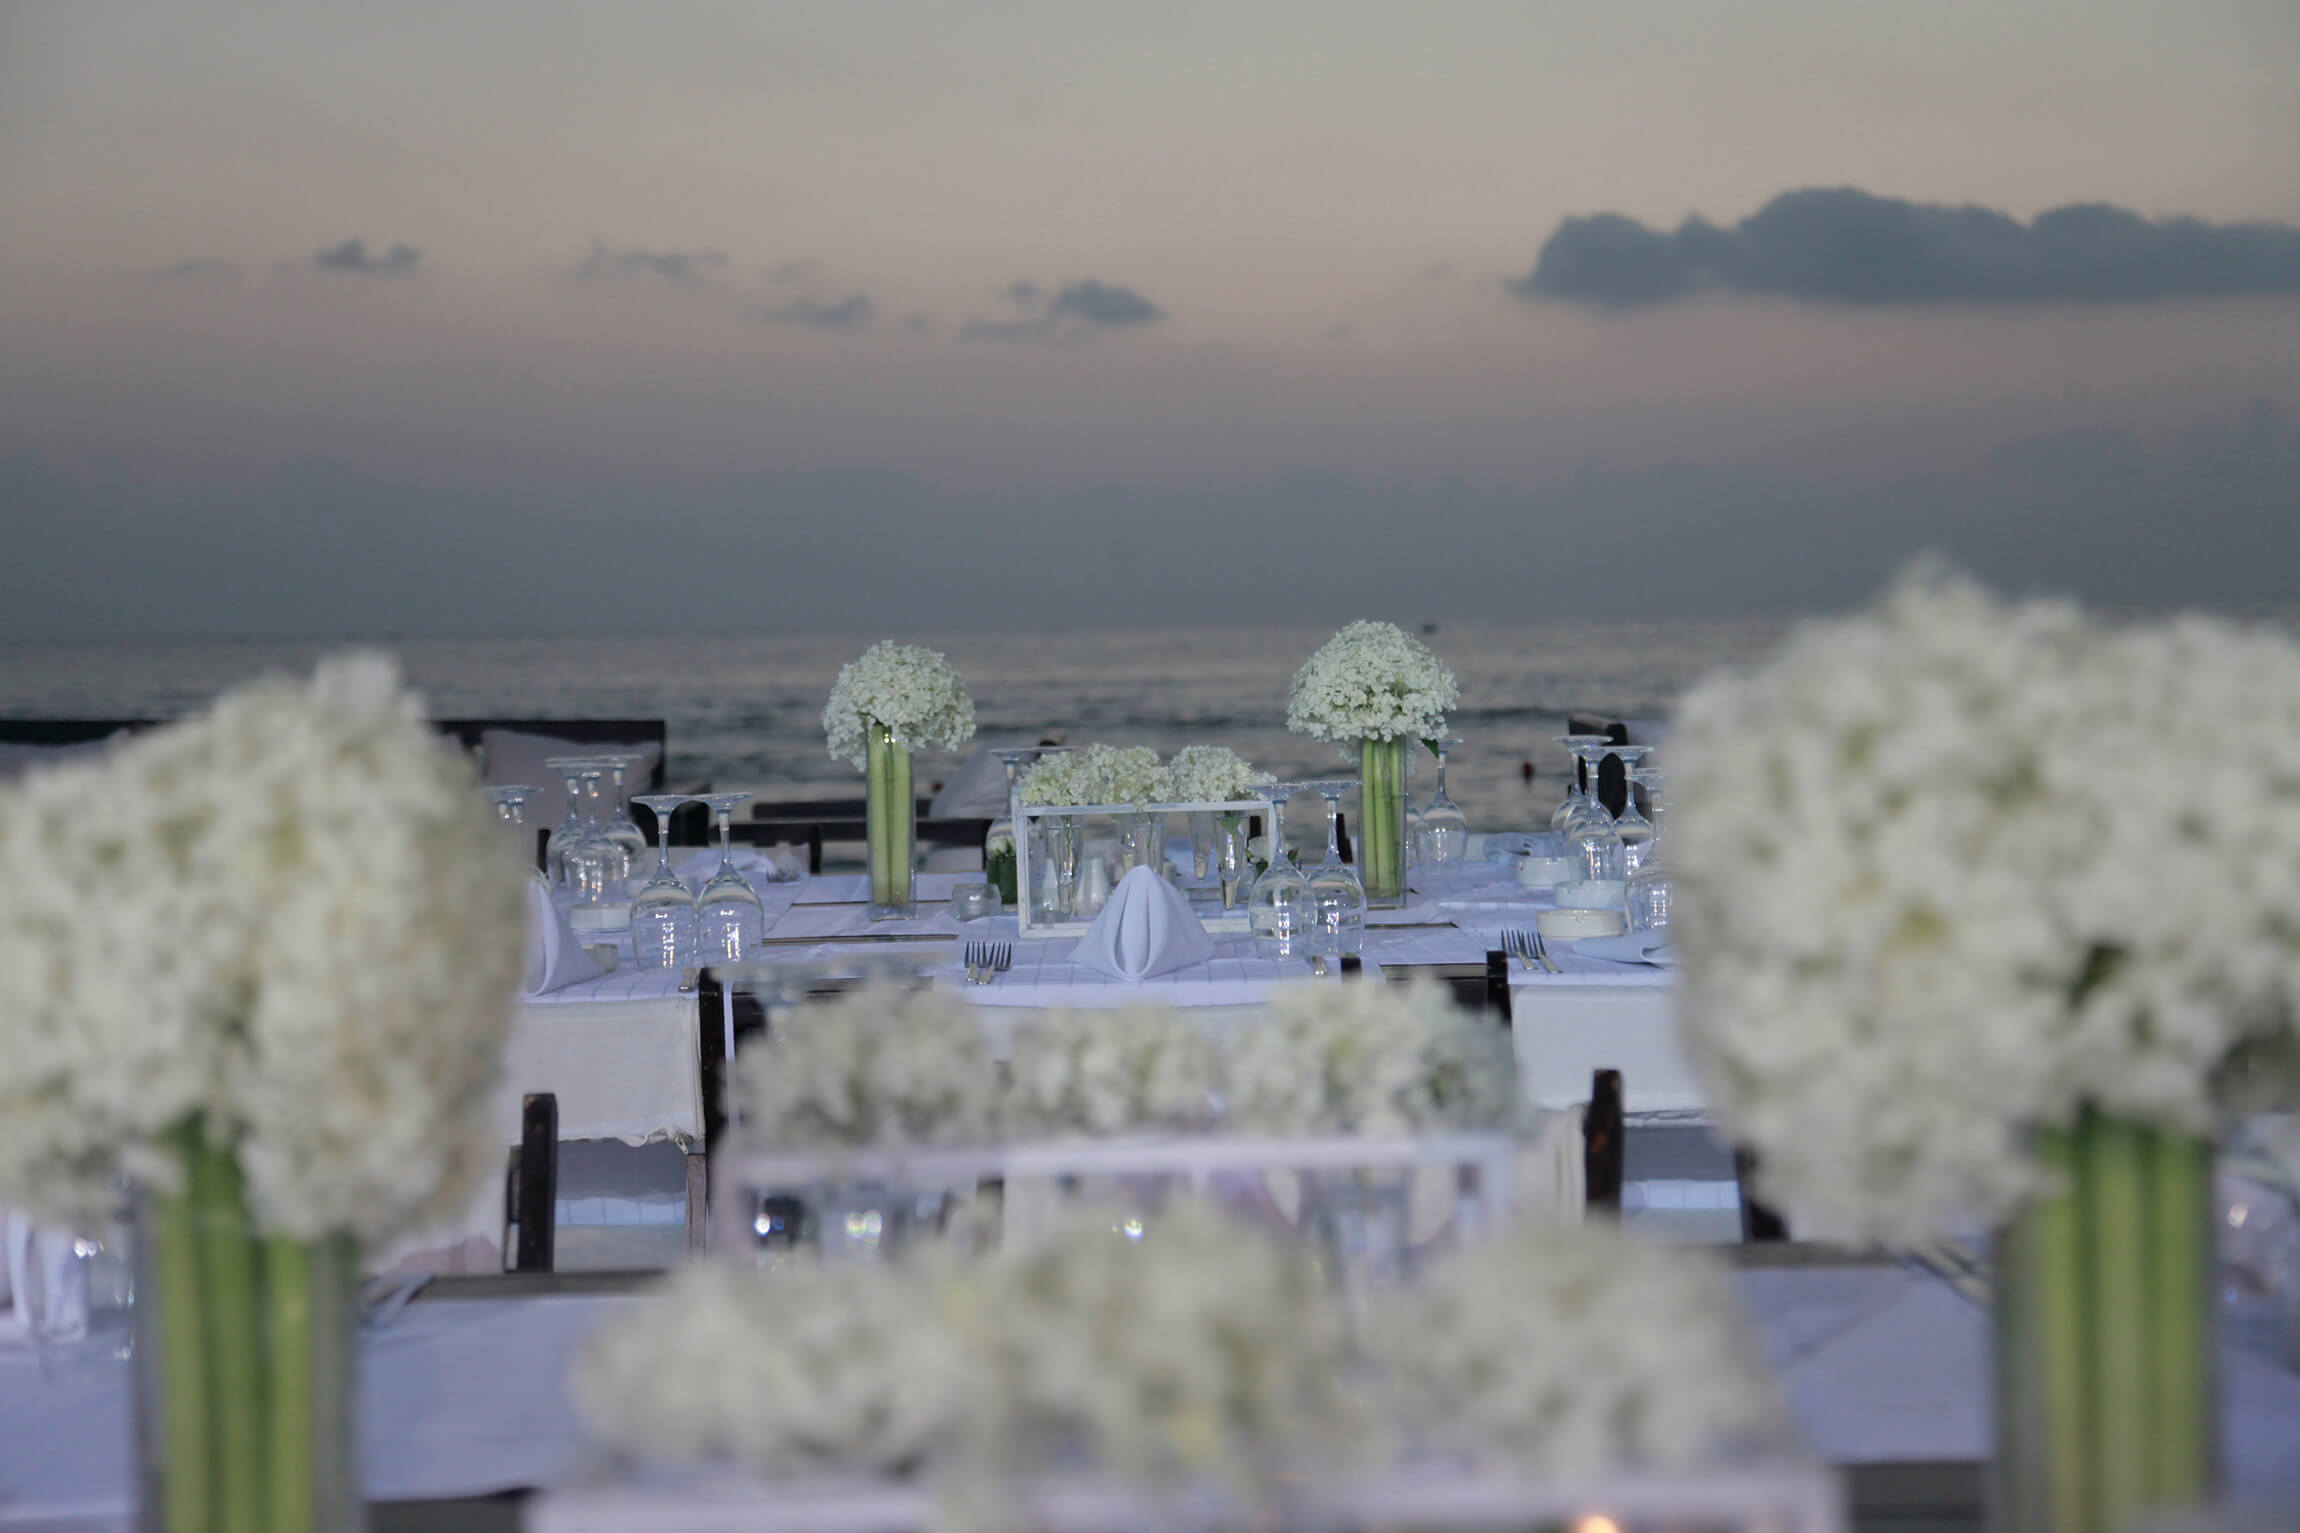 Orchid Events Beach Resort